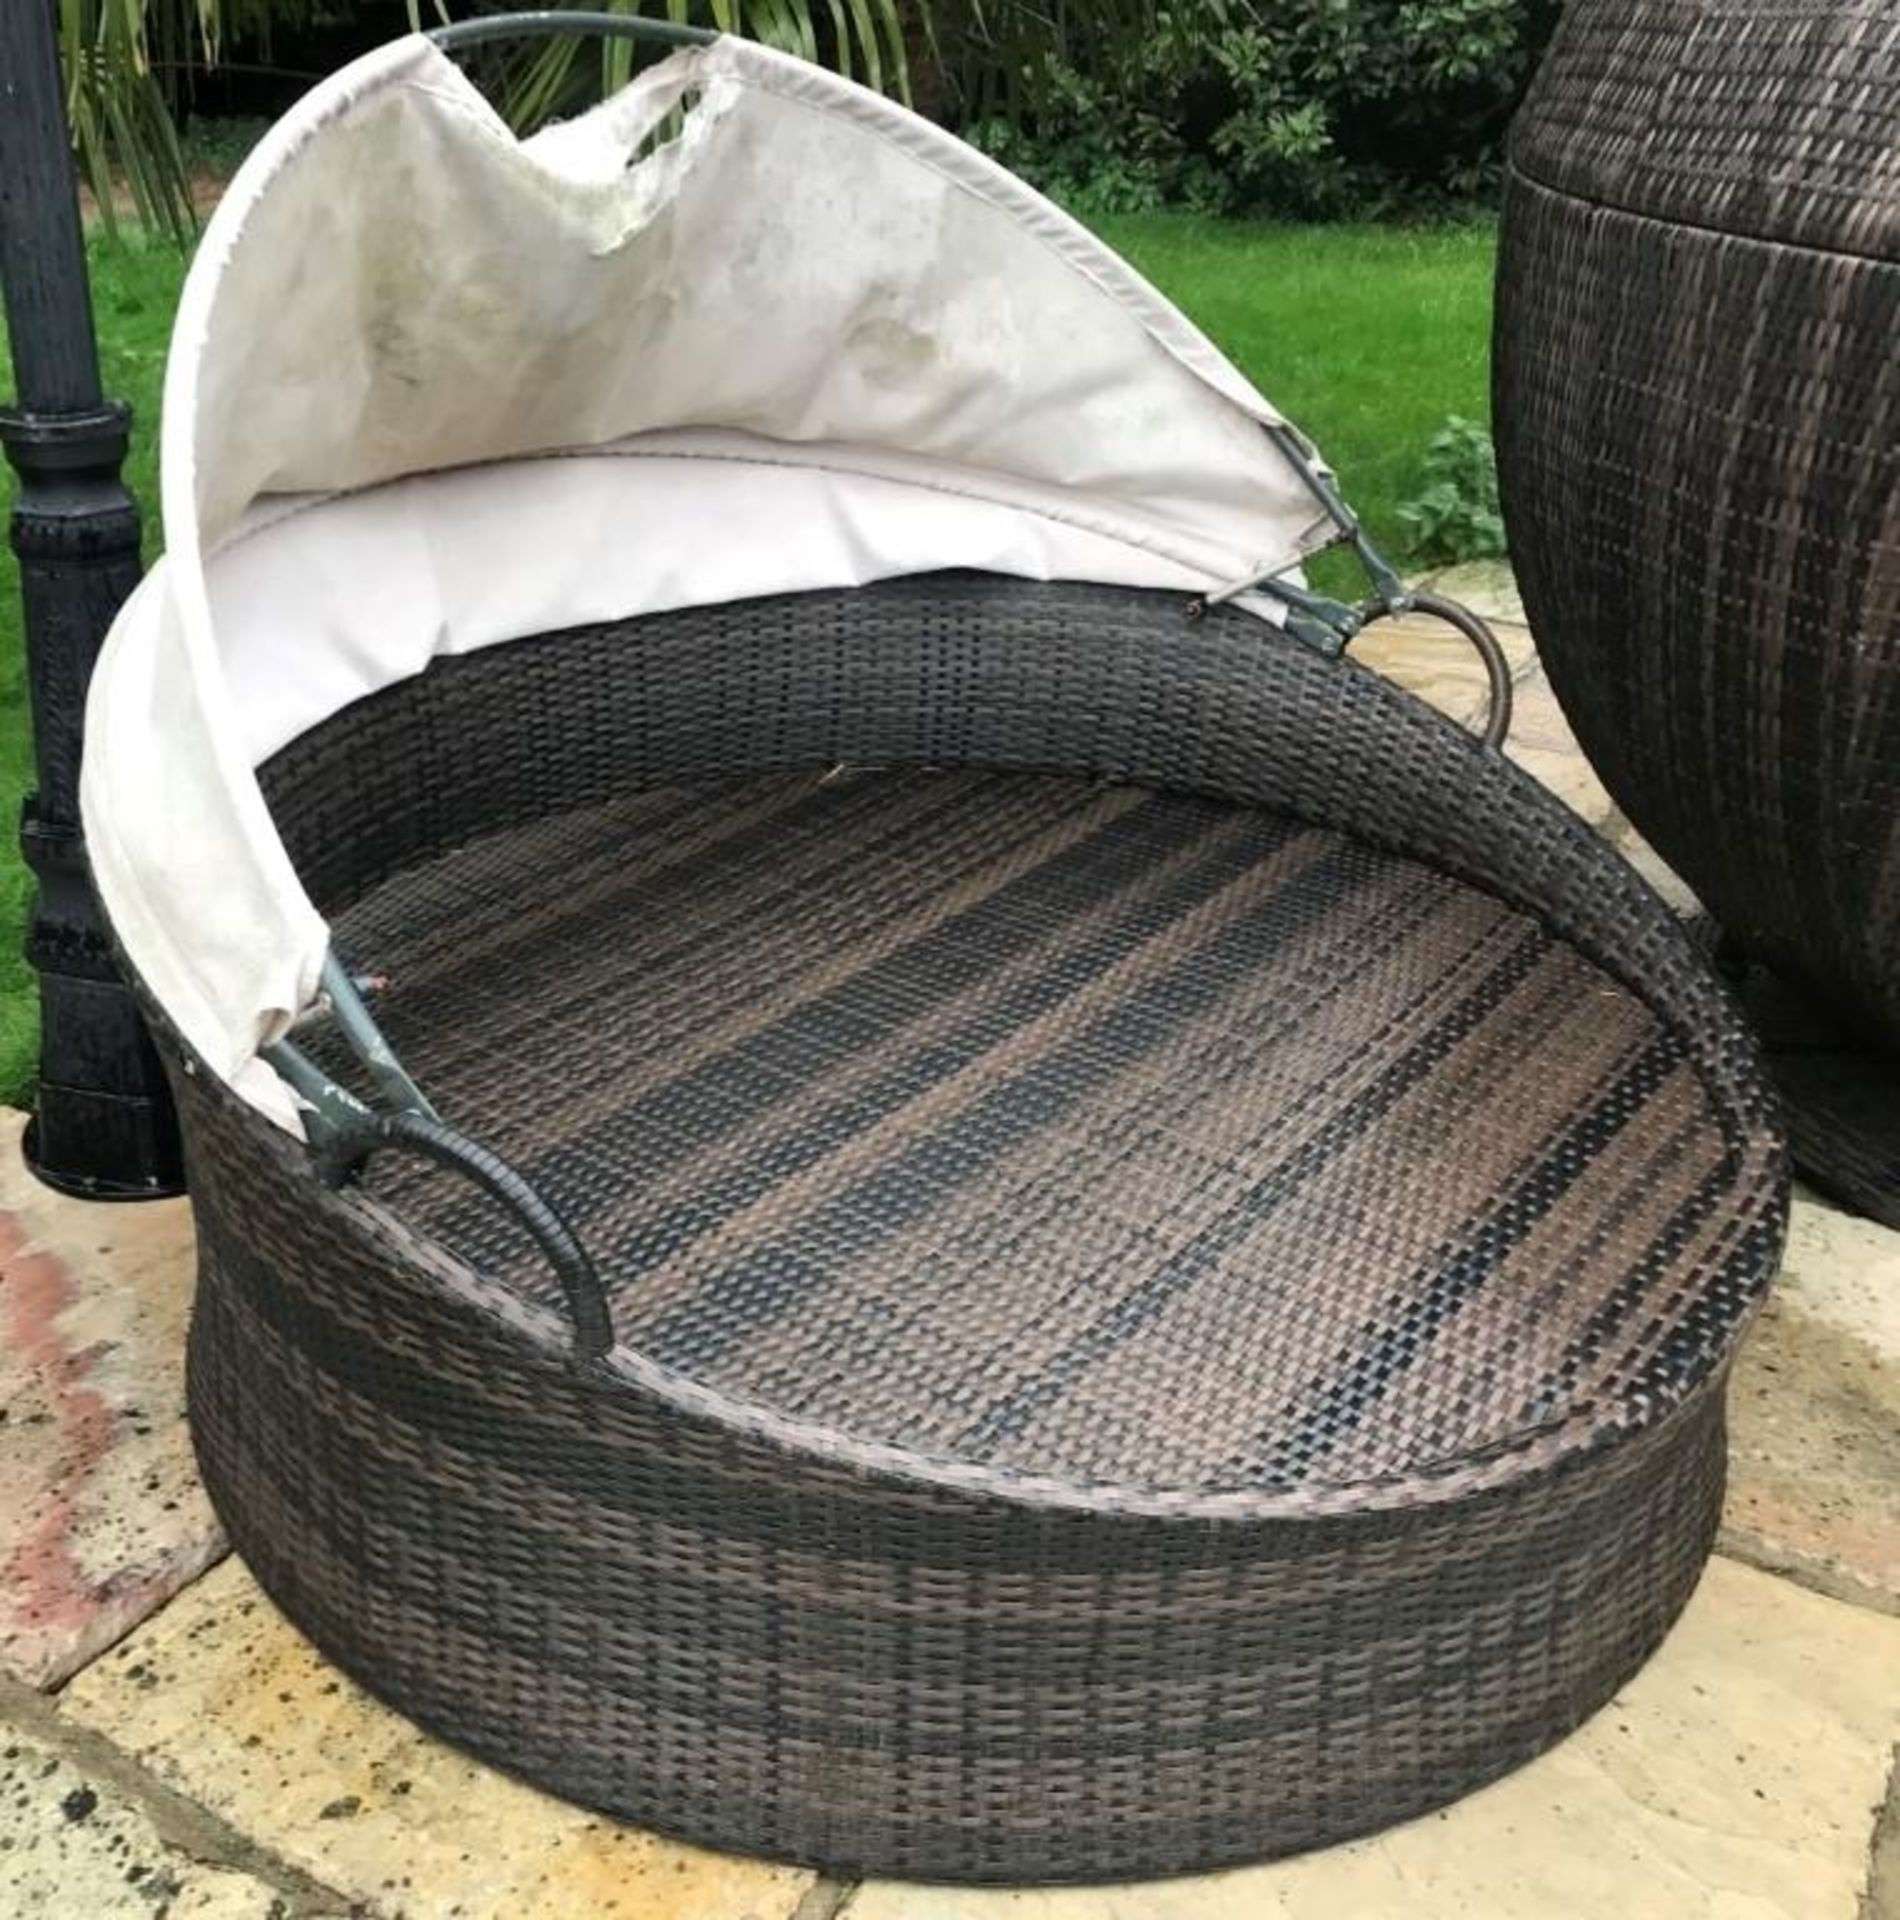 1 x Wicker / Rattan Round Daybed With Fabric Sun Hood - Ref: JB165 - Pre-Owned - NO VAT ON THE